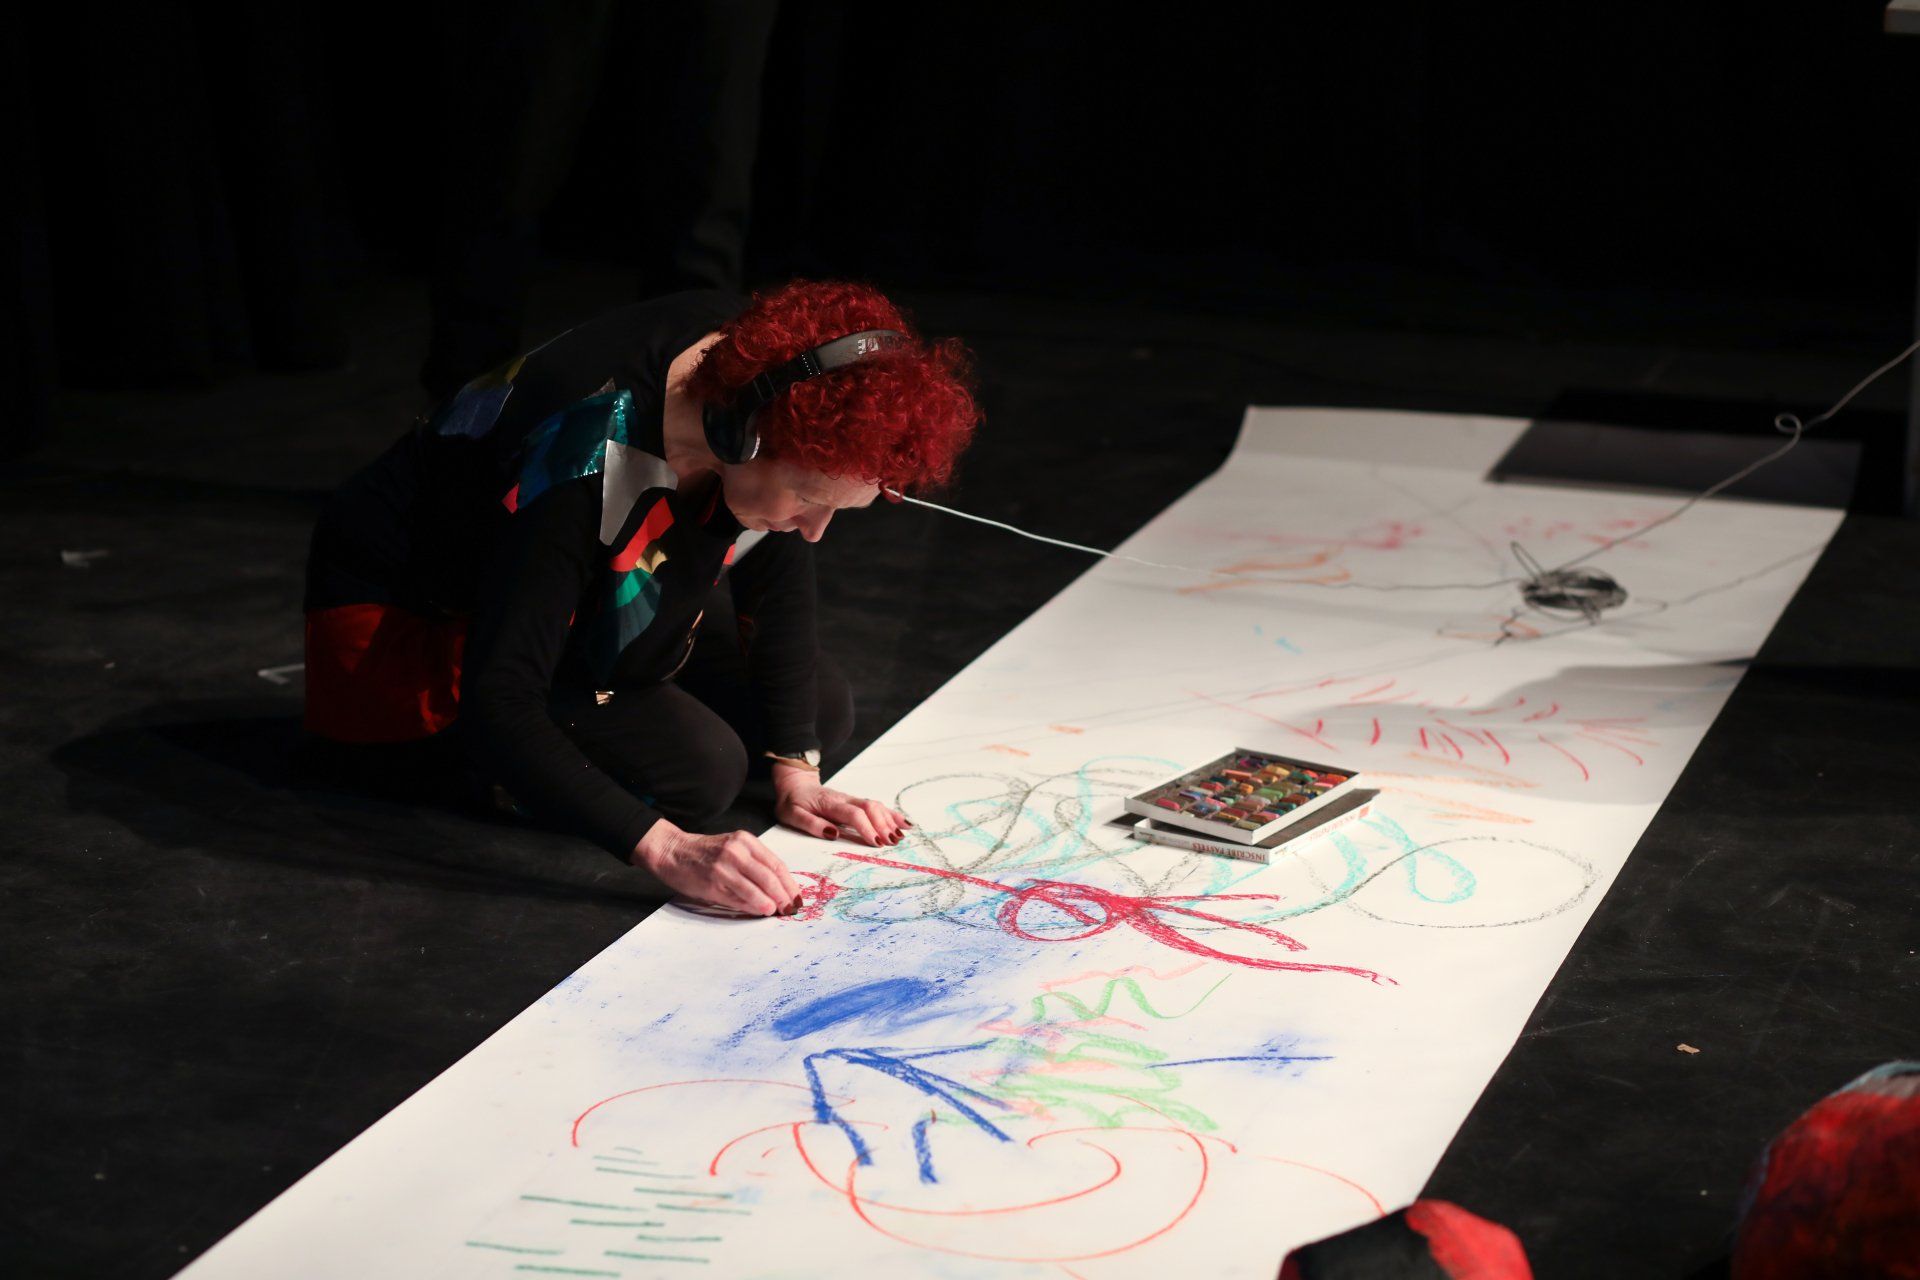 a woman with red hair is drawing on a large piece of paper